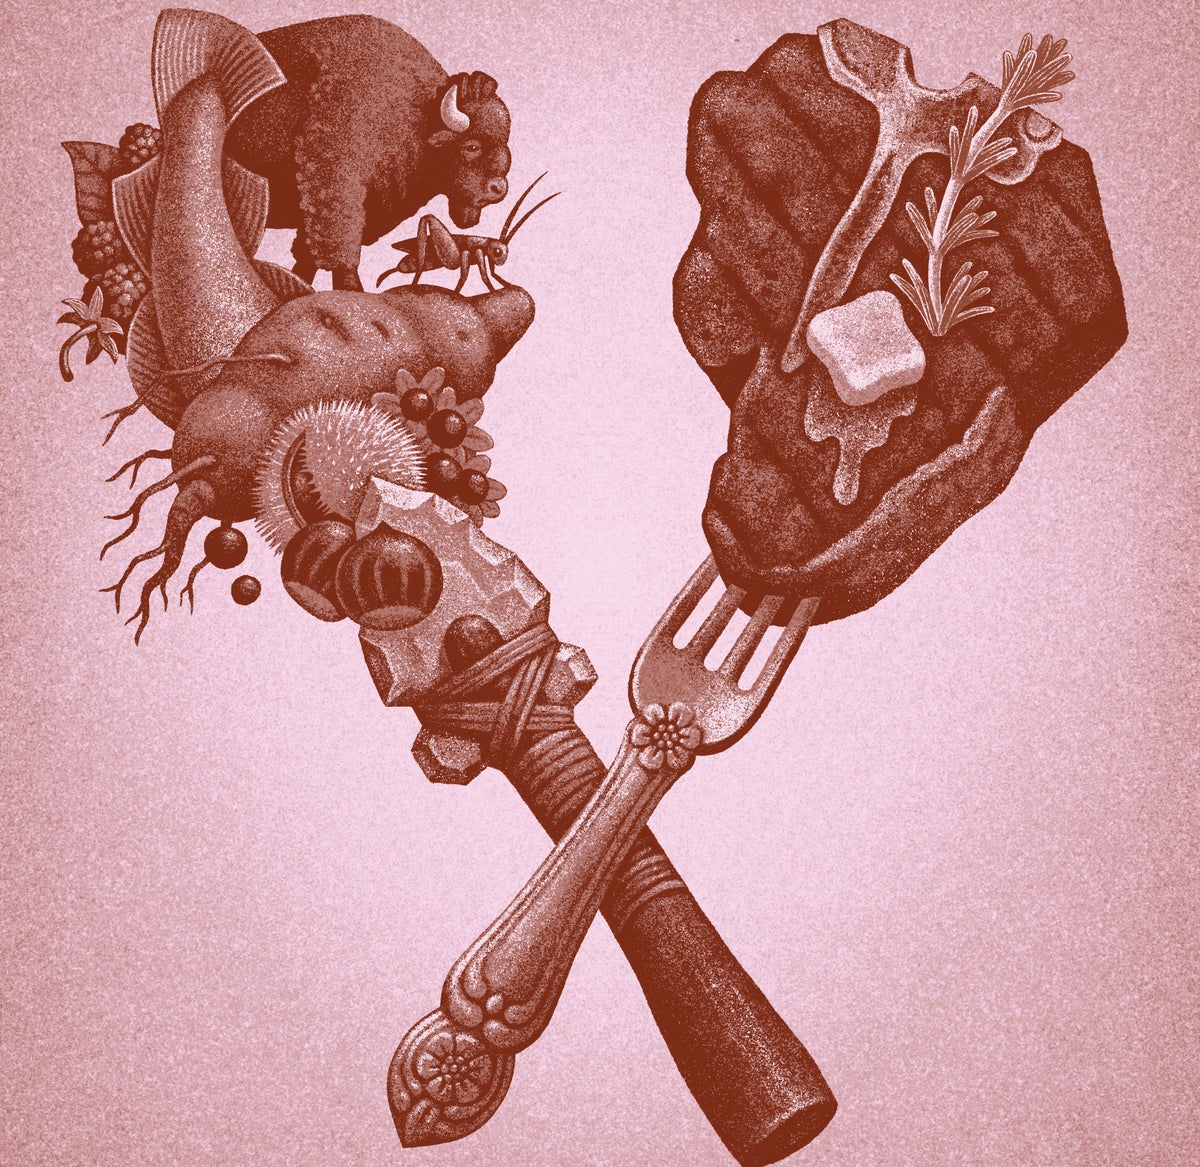 Illustration of criss-crossed fork and spear with different meats on their ends